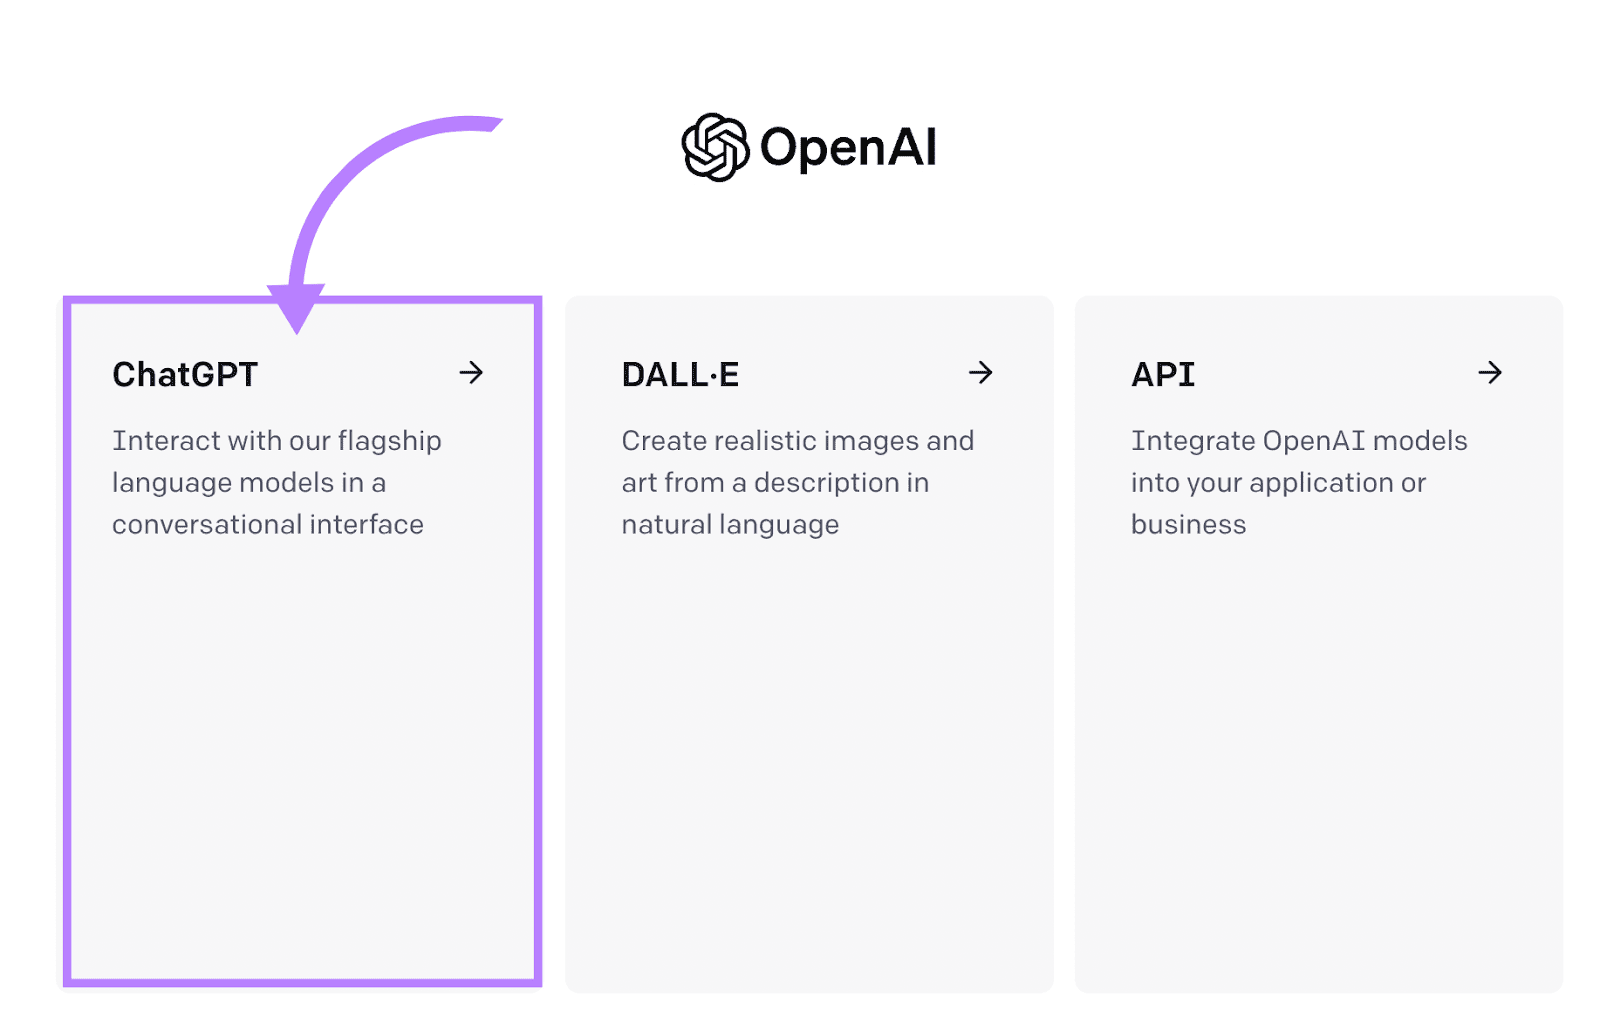 OpenAI’s apps page with "ChatGPT" selected